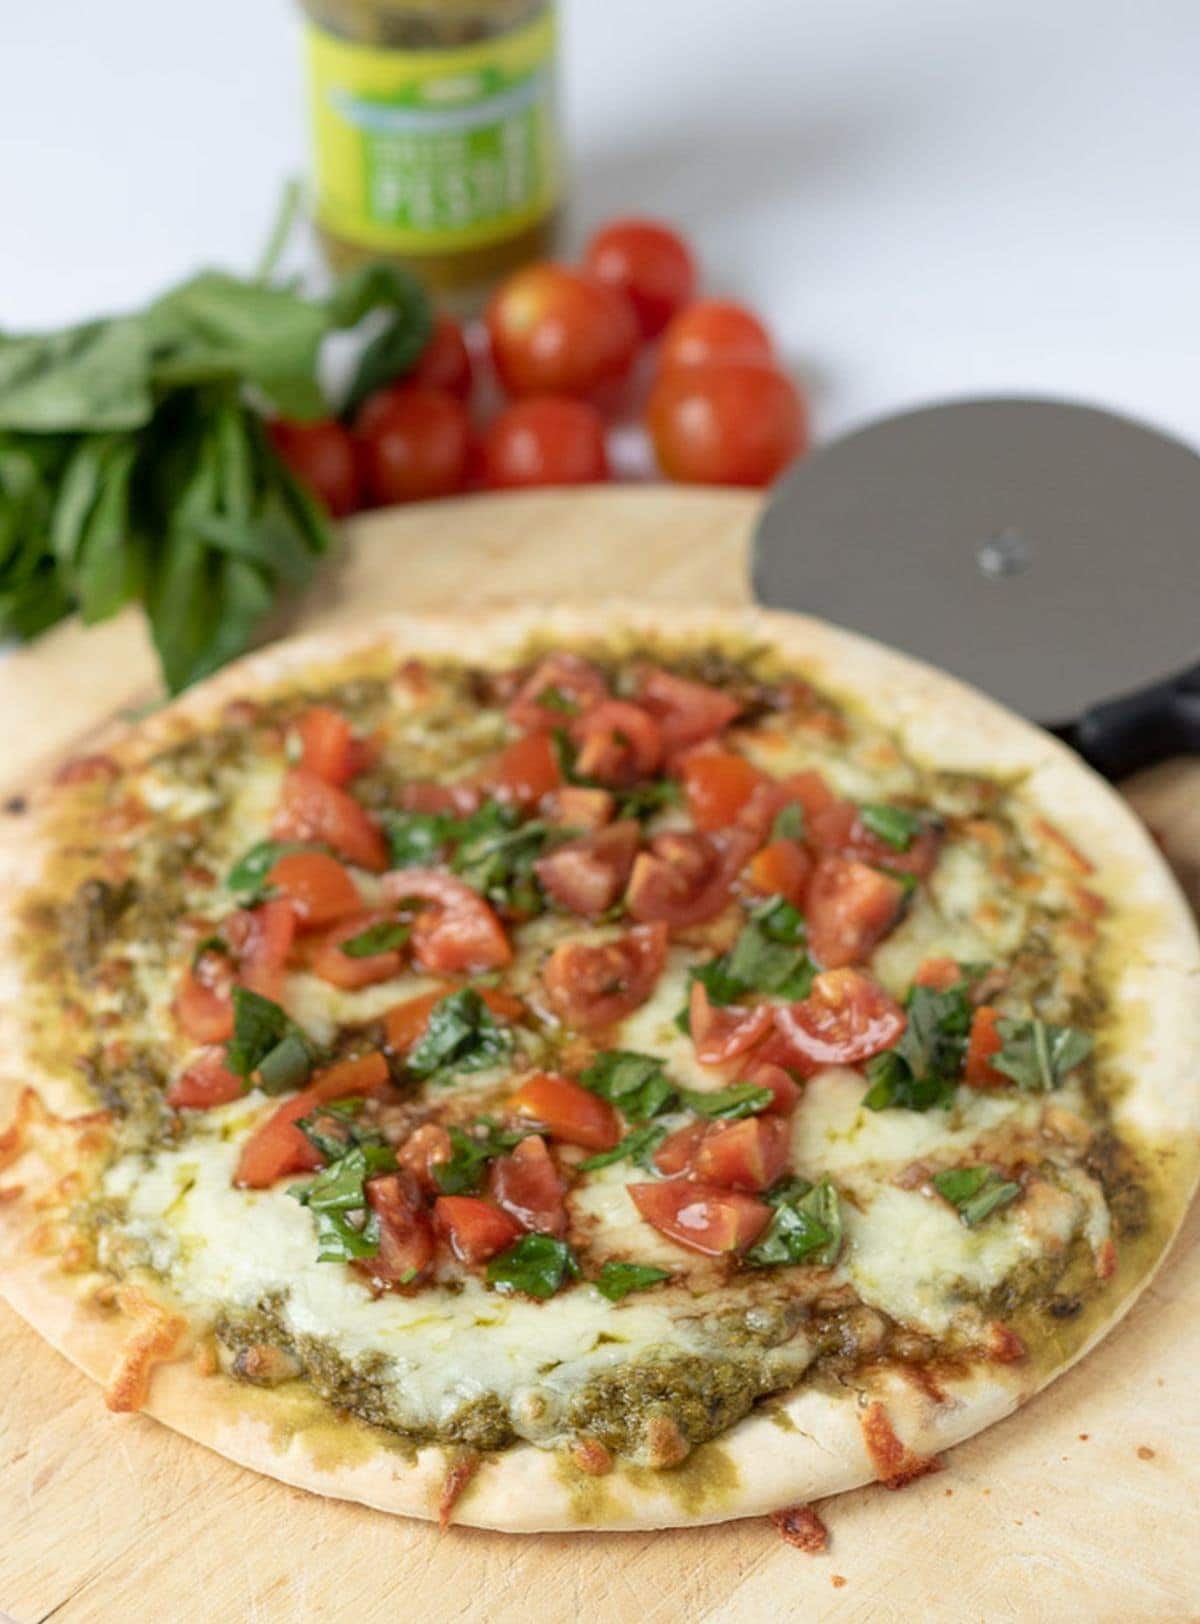 A delicious pesto pizza cooked sitting on a chopping board, ready to carve into slices and eat with cherry tomatoes and basil in the background for decoration.